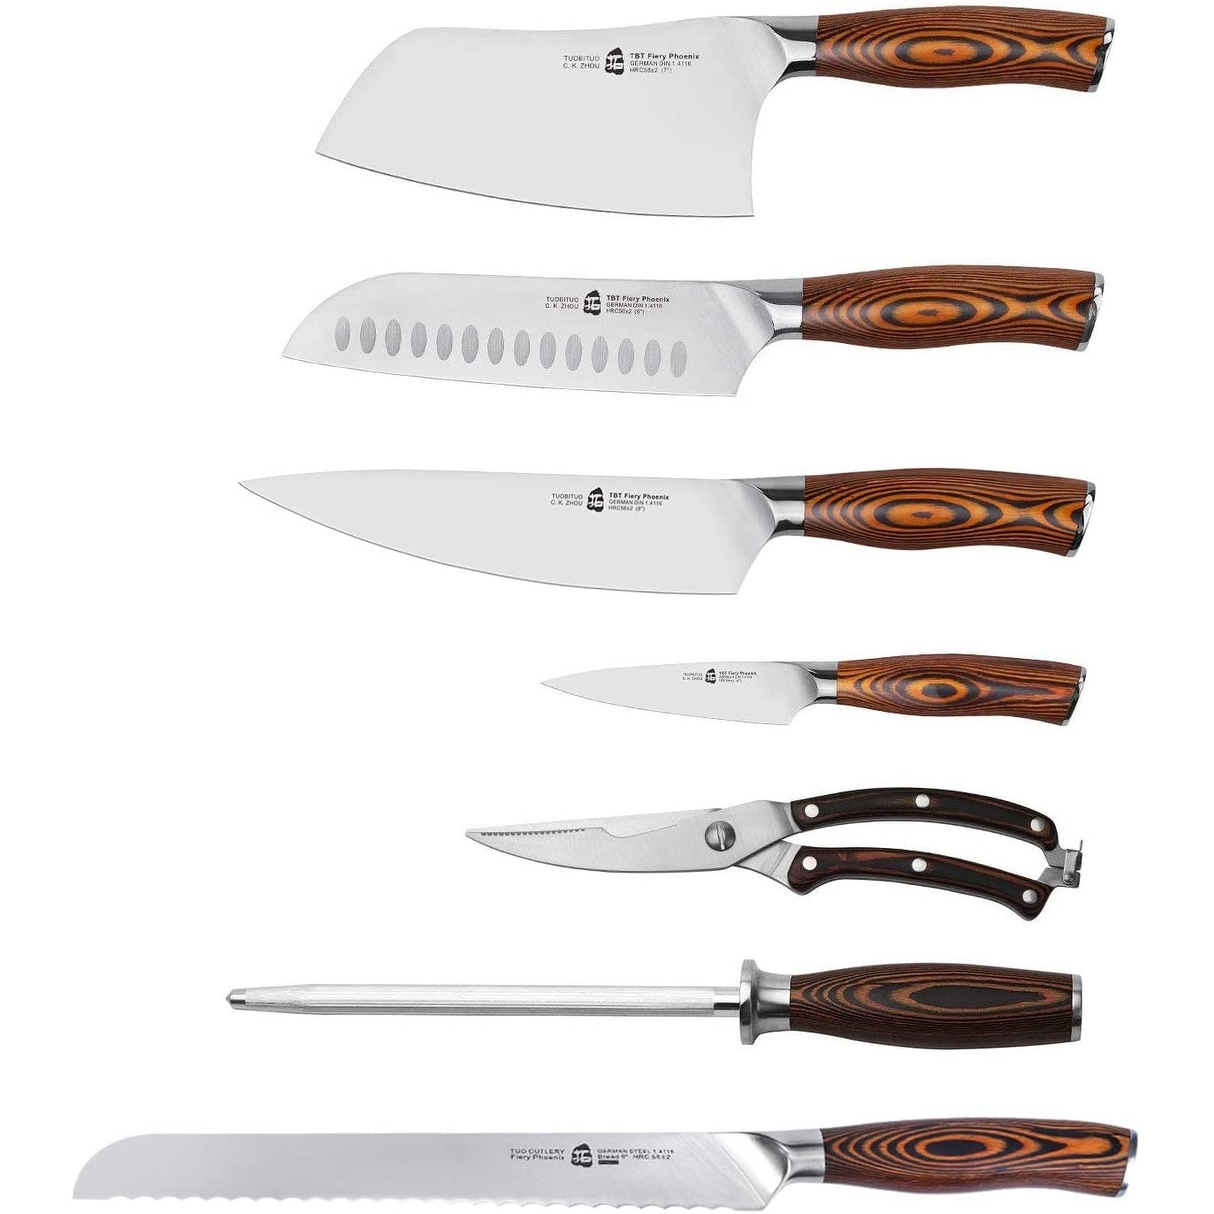 https://ak1.ostkcdn.com/images/products/is/images/direct/8d5771e3b011a7f78c69205f12008c18fe65b533/TUO-Fiery-Series-8pcs-Knives-Set-w-Wooden-Block%2CHoning-Steel-and-Shears.jpg